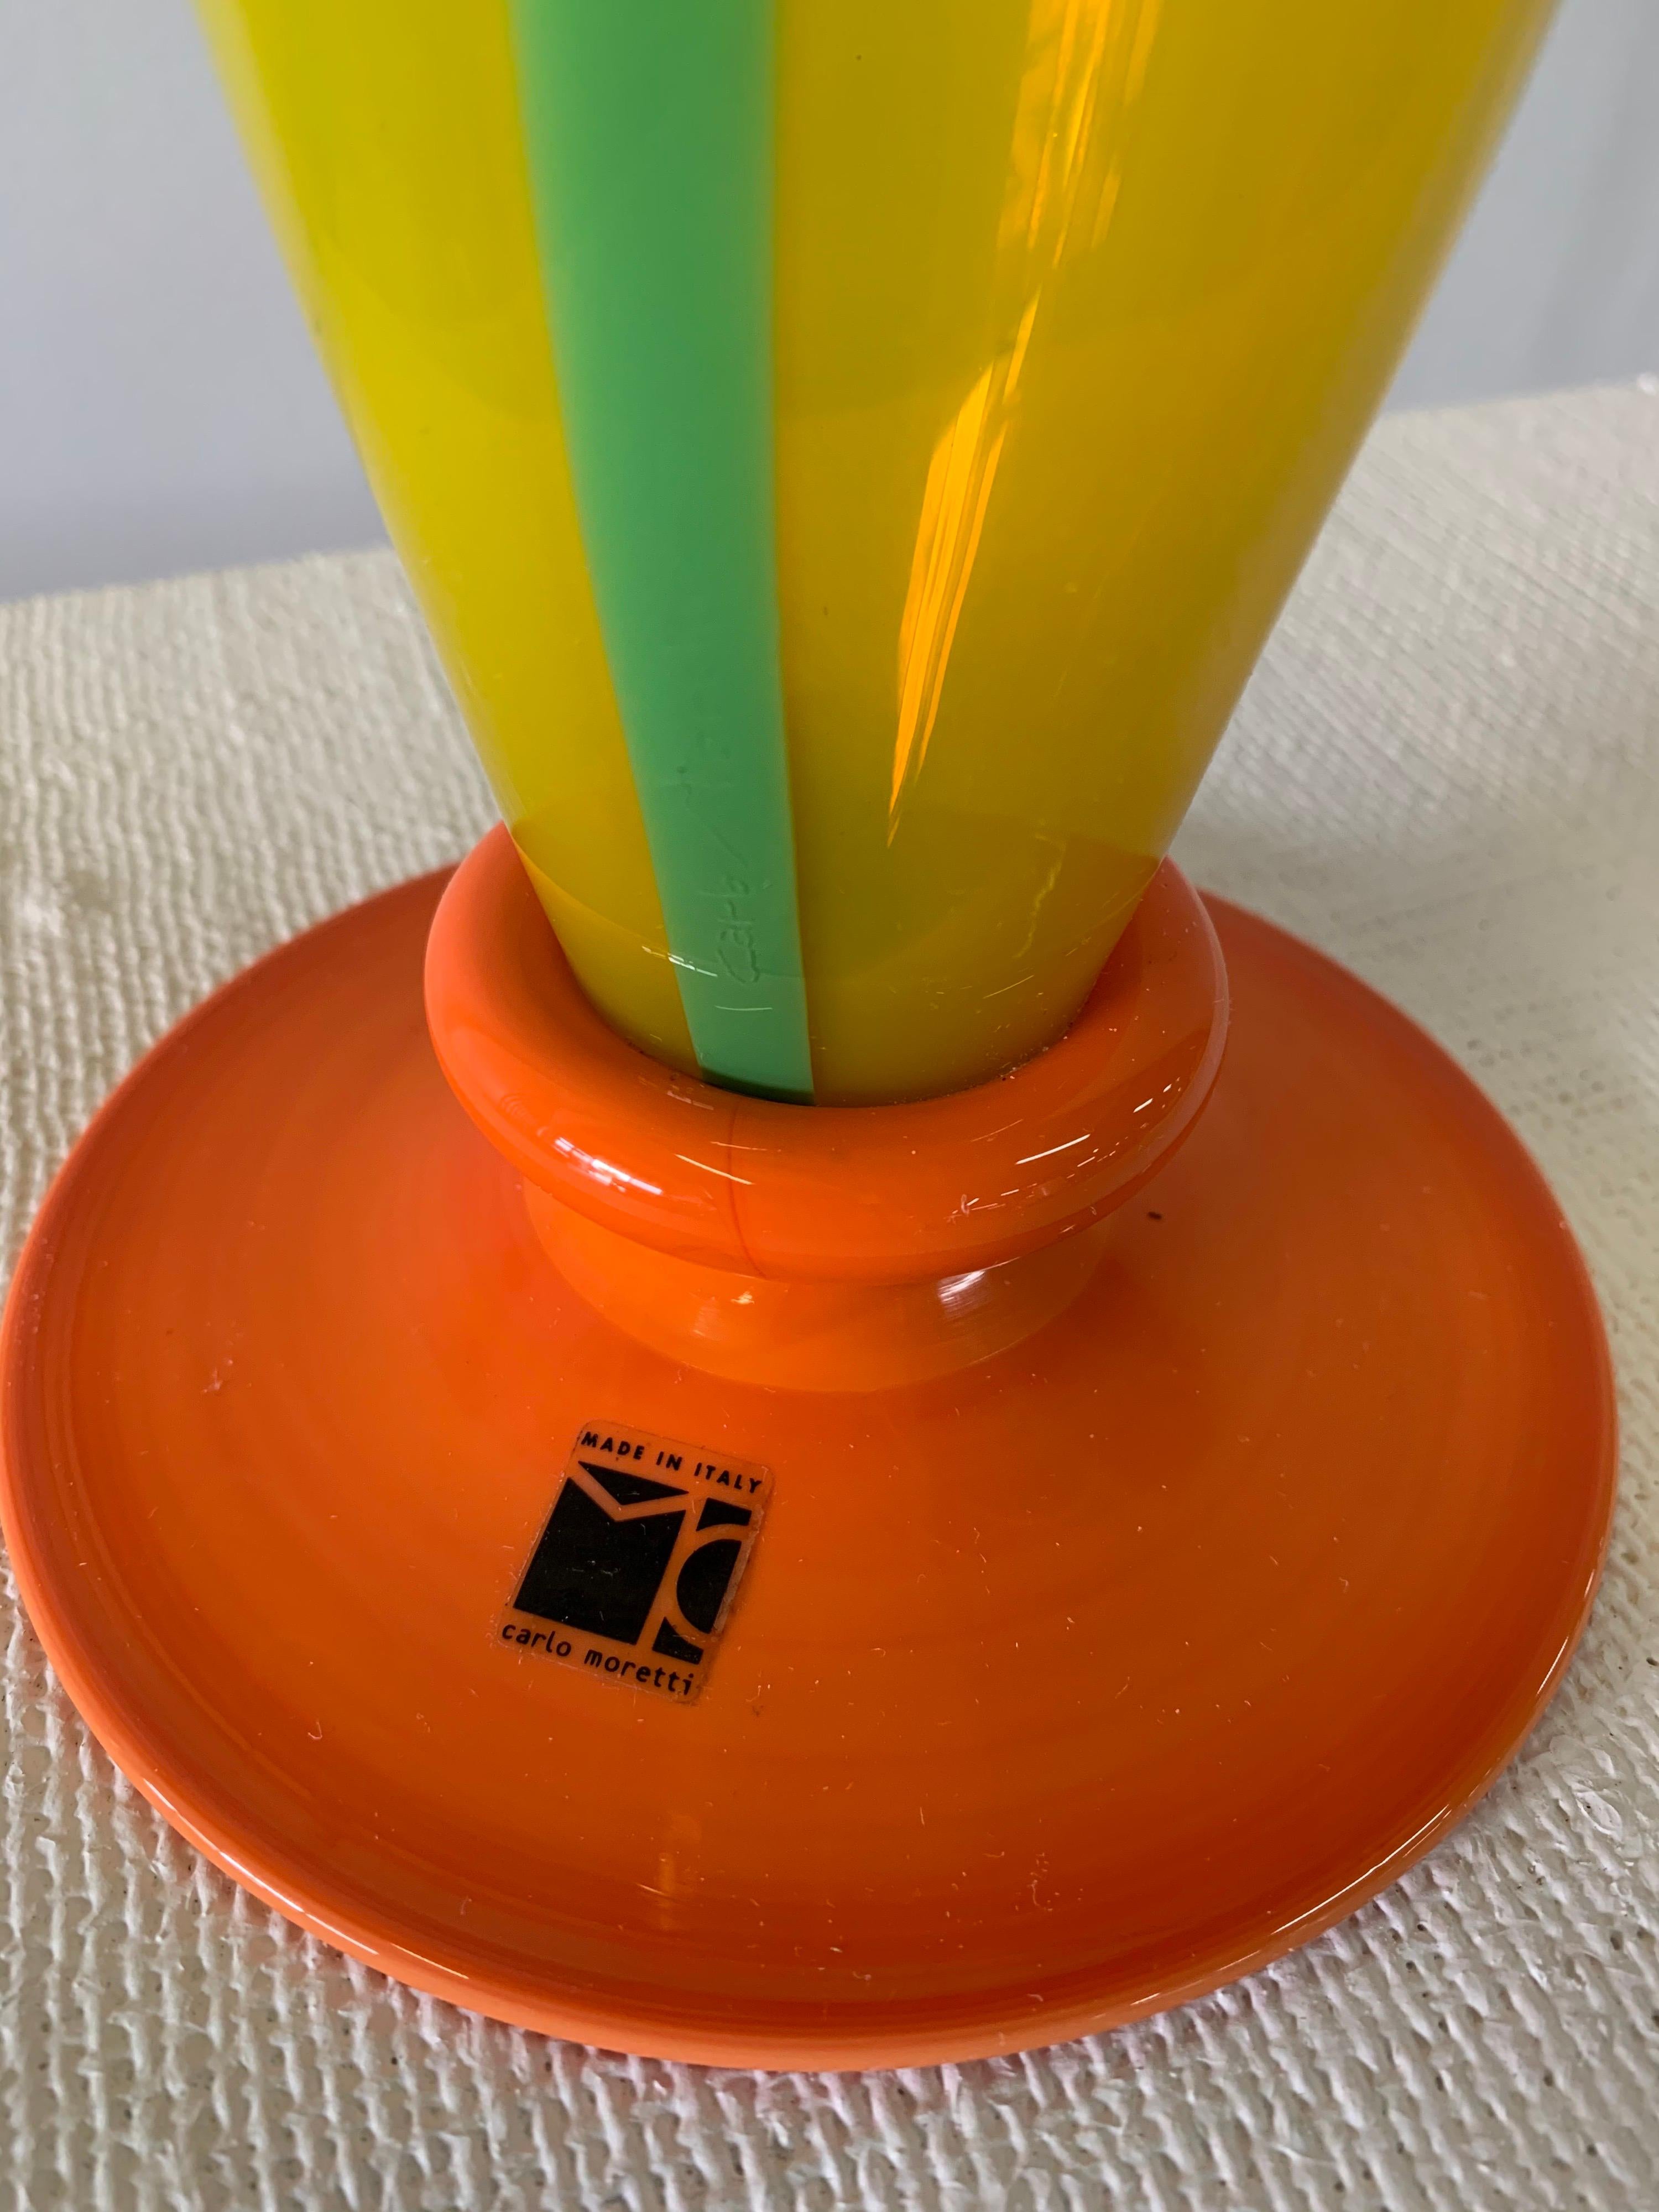 Vivid yellow and orange Tulip design with tulip stopper. Sticker to base.

Since the founding of Carlo Moretti by the Moretti family in 1959, the Carlo Moretti Murano Crystal objects have been created with innovation and continuous research.